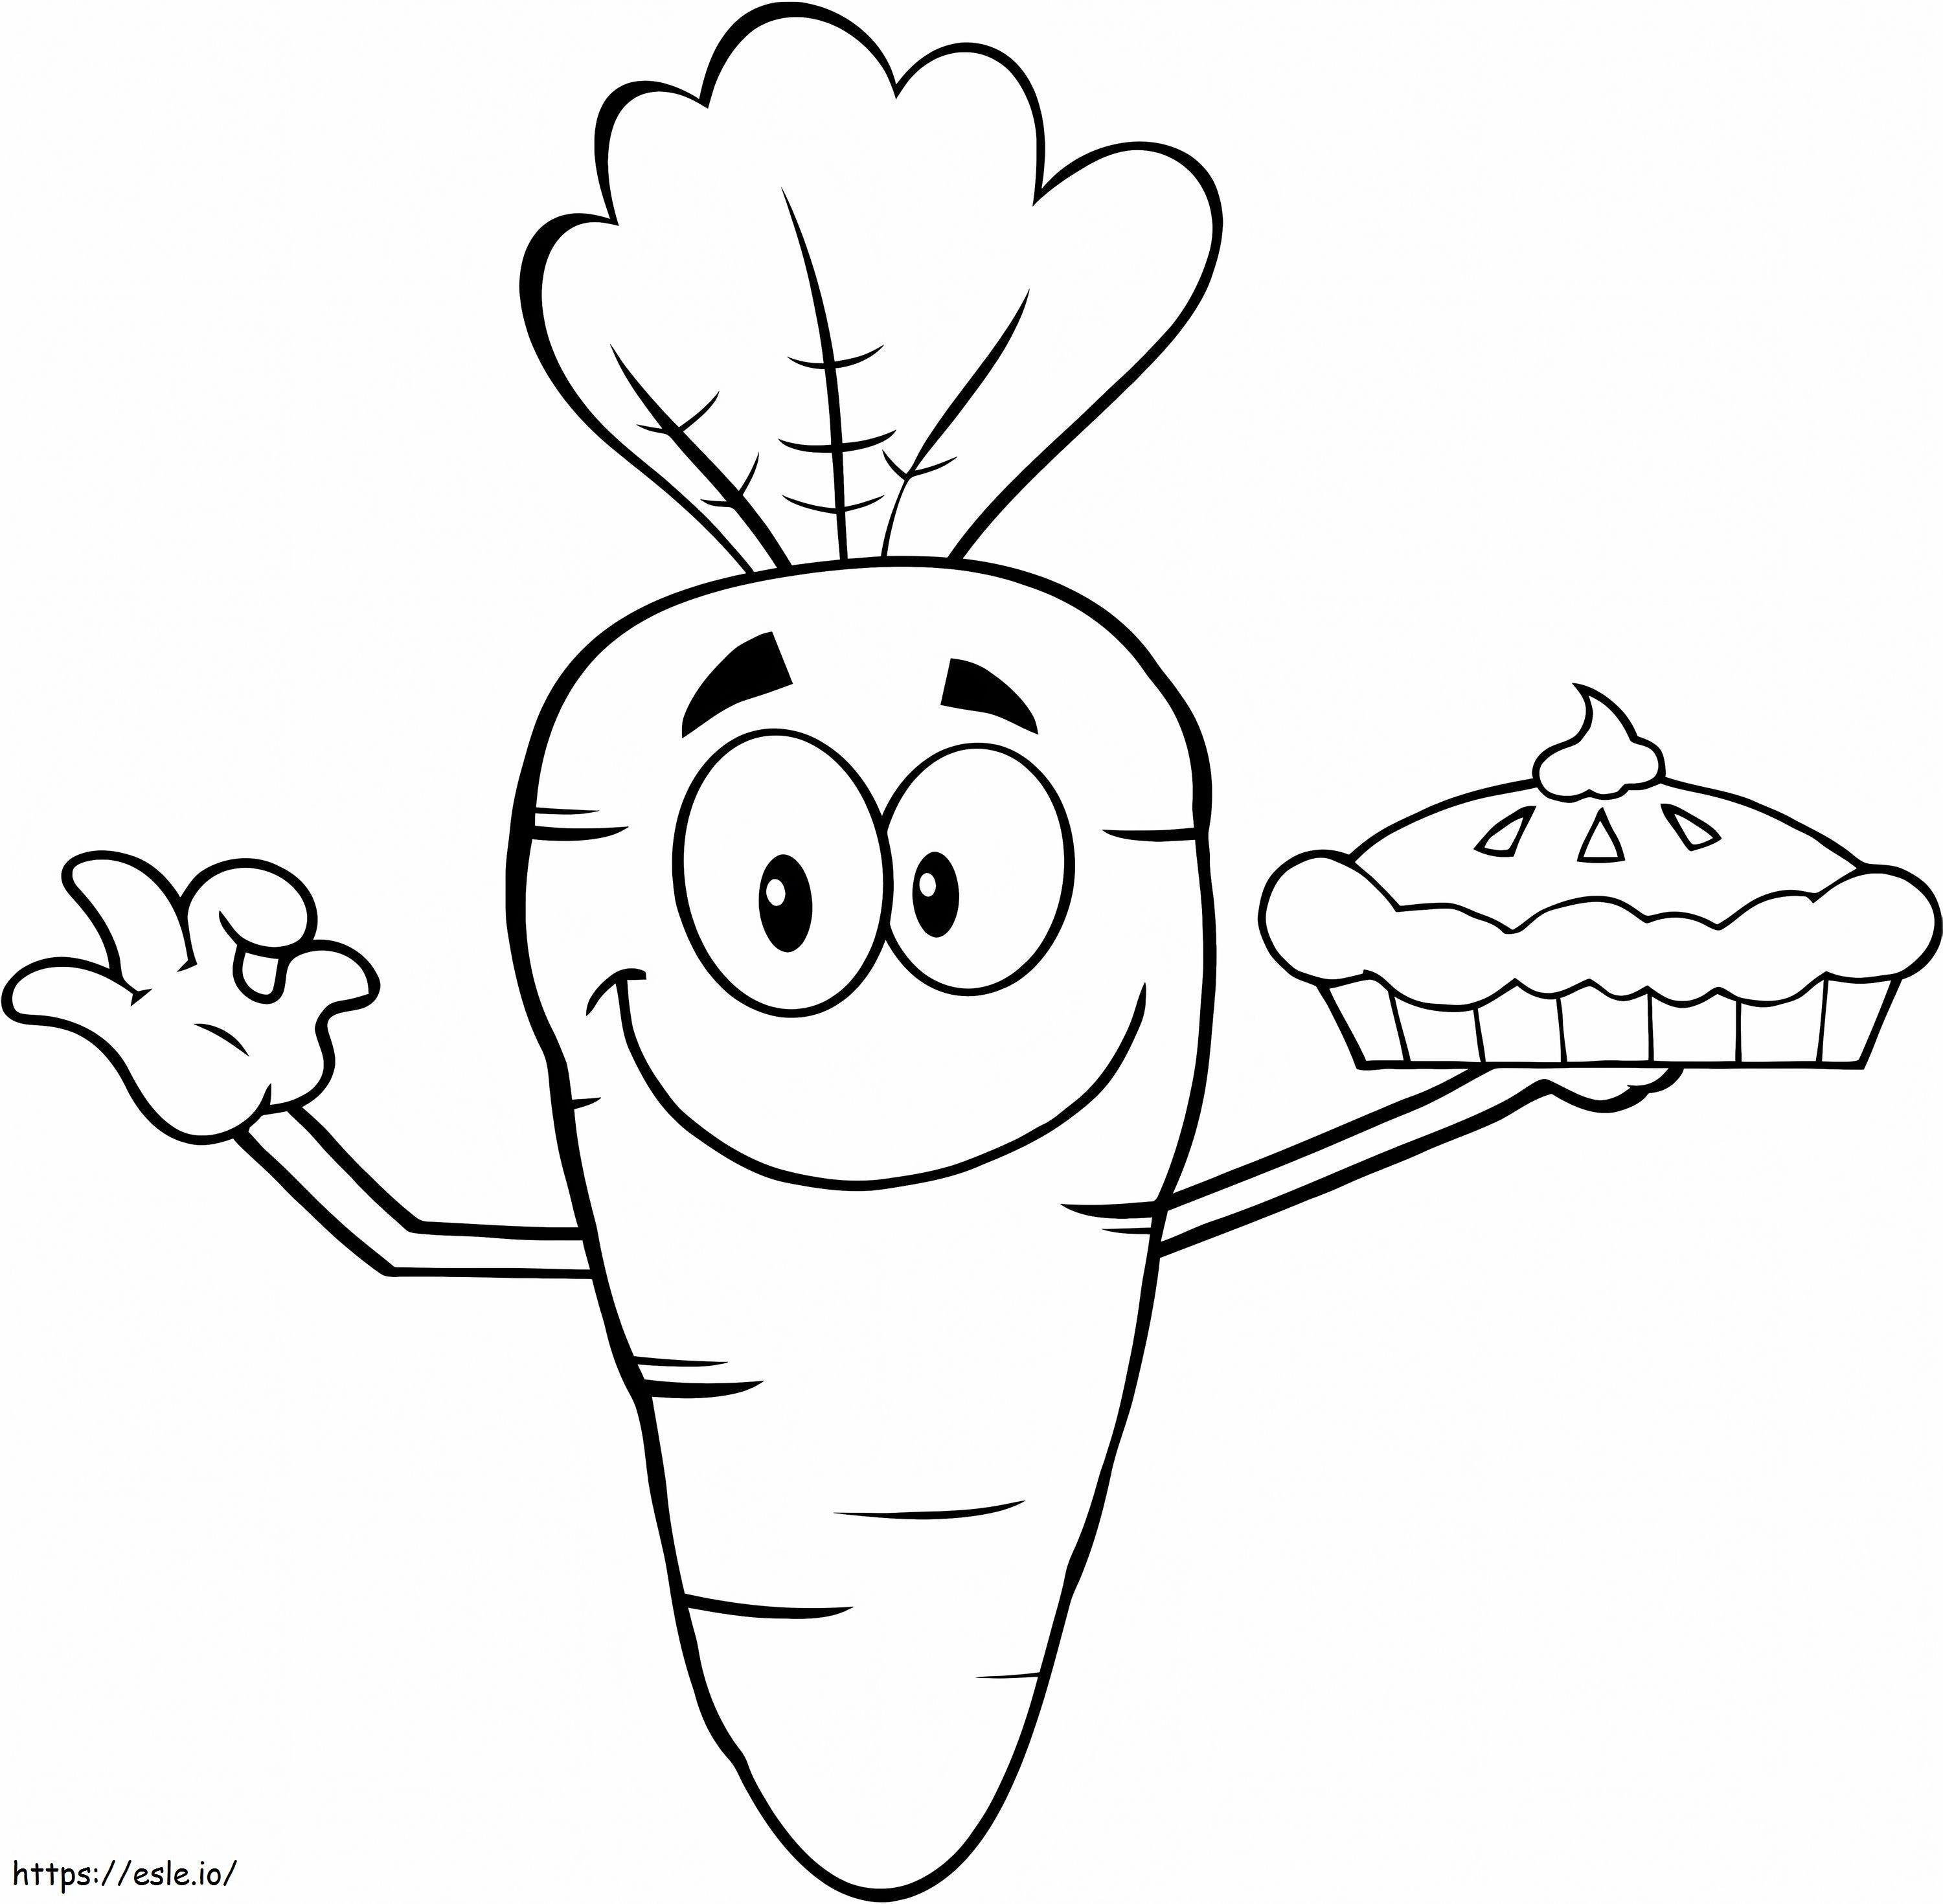 1543974622 Smiling Cartoon Carrot Holding Up A Pie coloring page